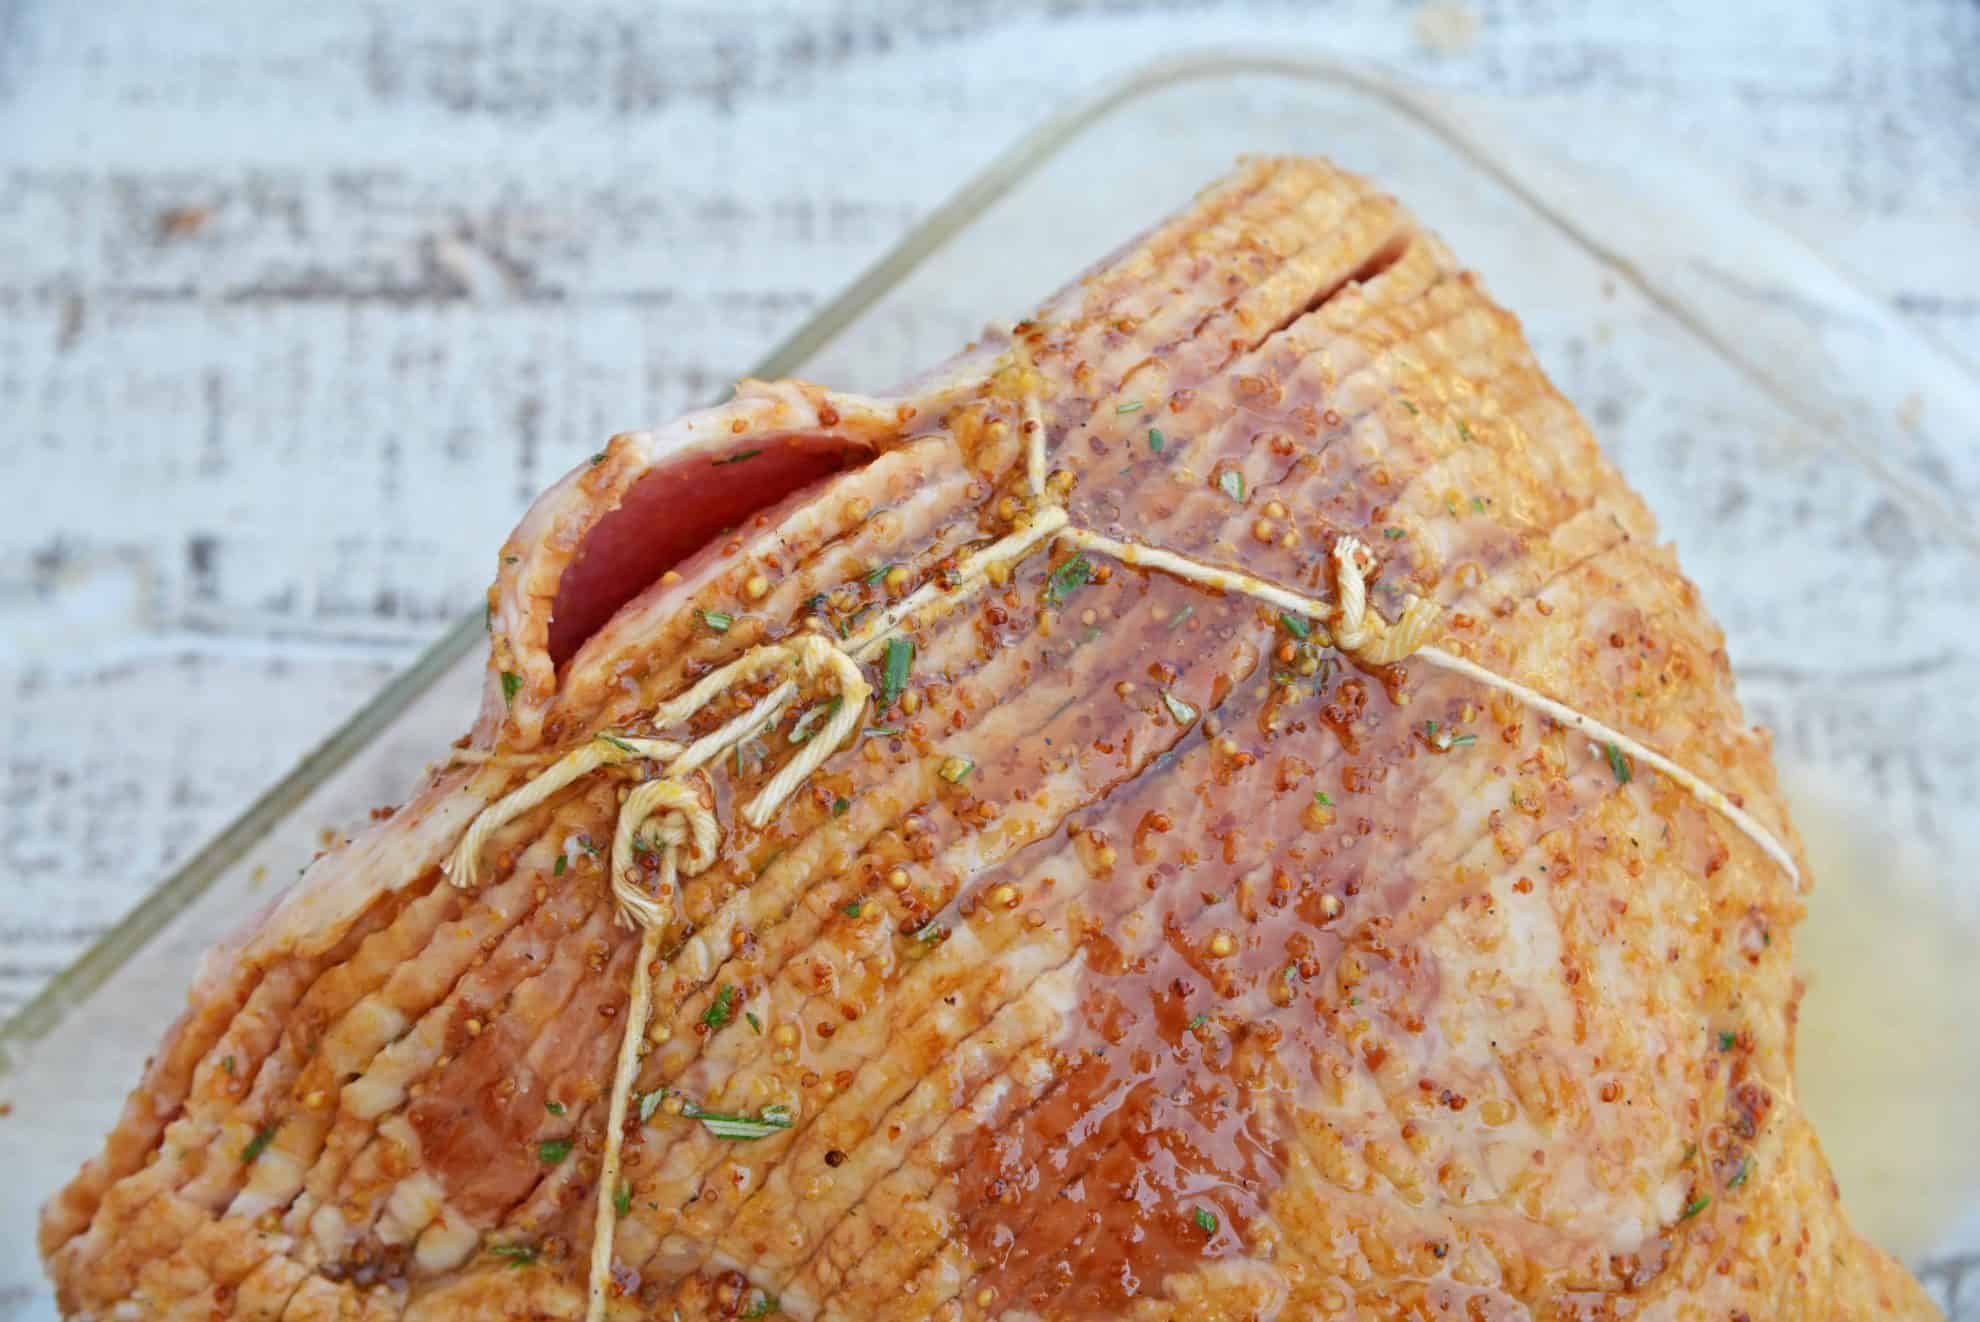 Mustard Brown Sugar Baked Ham is a ham glaze recipe that's perfect for a Christmas ham or an Easter ham. One of the best easy ham recipes! #hamglazerecipe #spiralhamrecipes #easterham #christmasham www.savoryexperiments.com